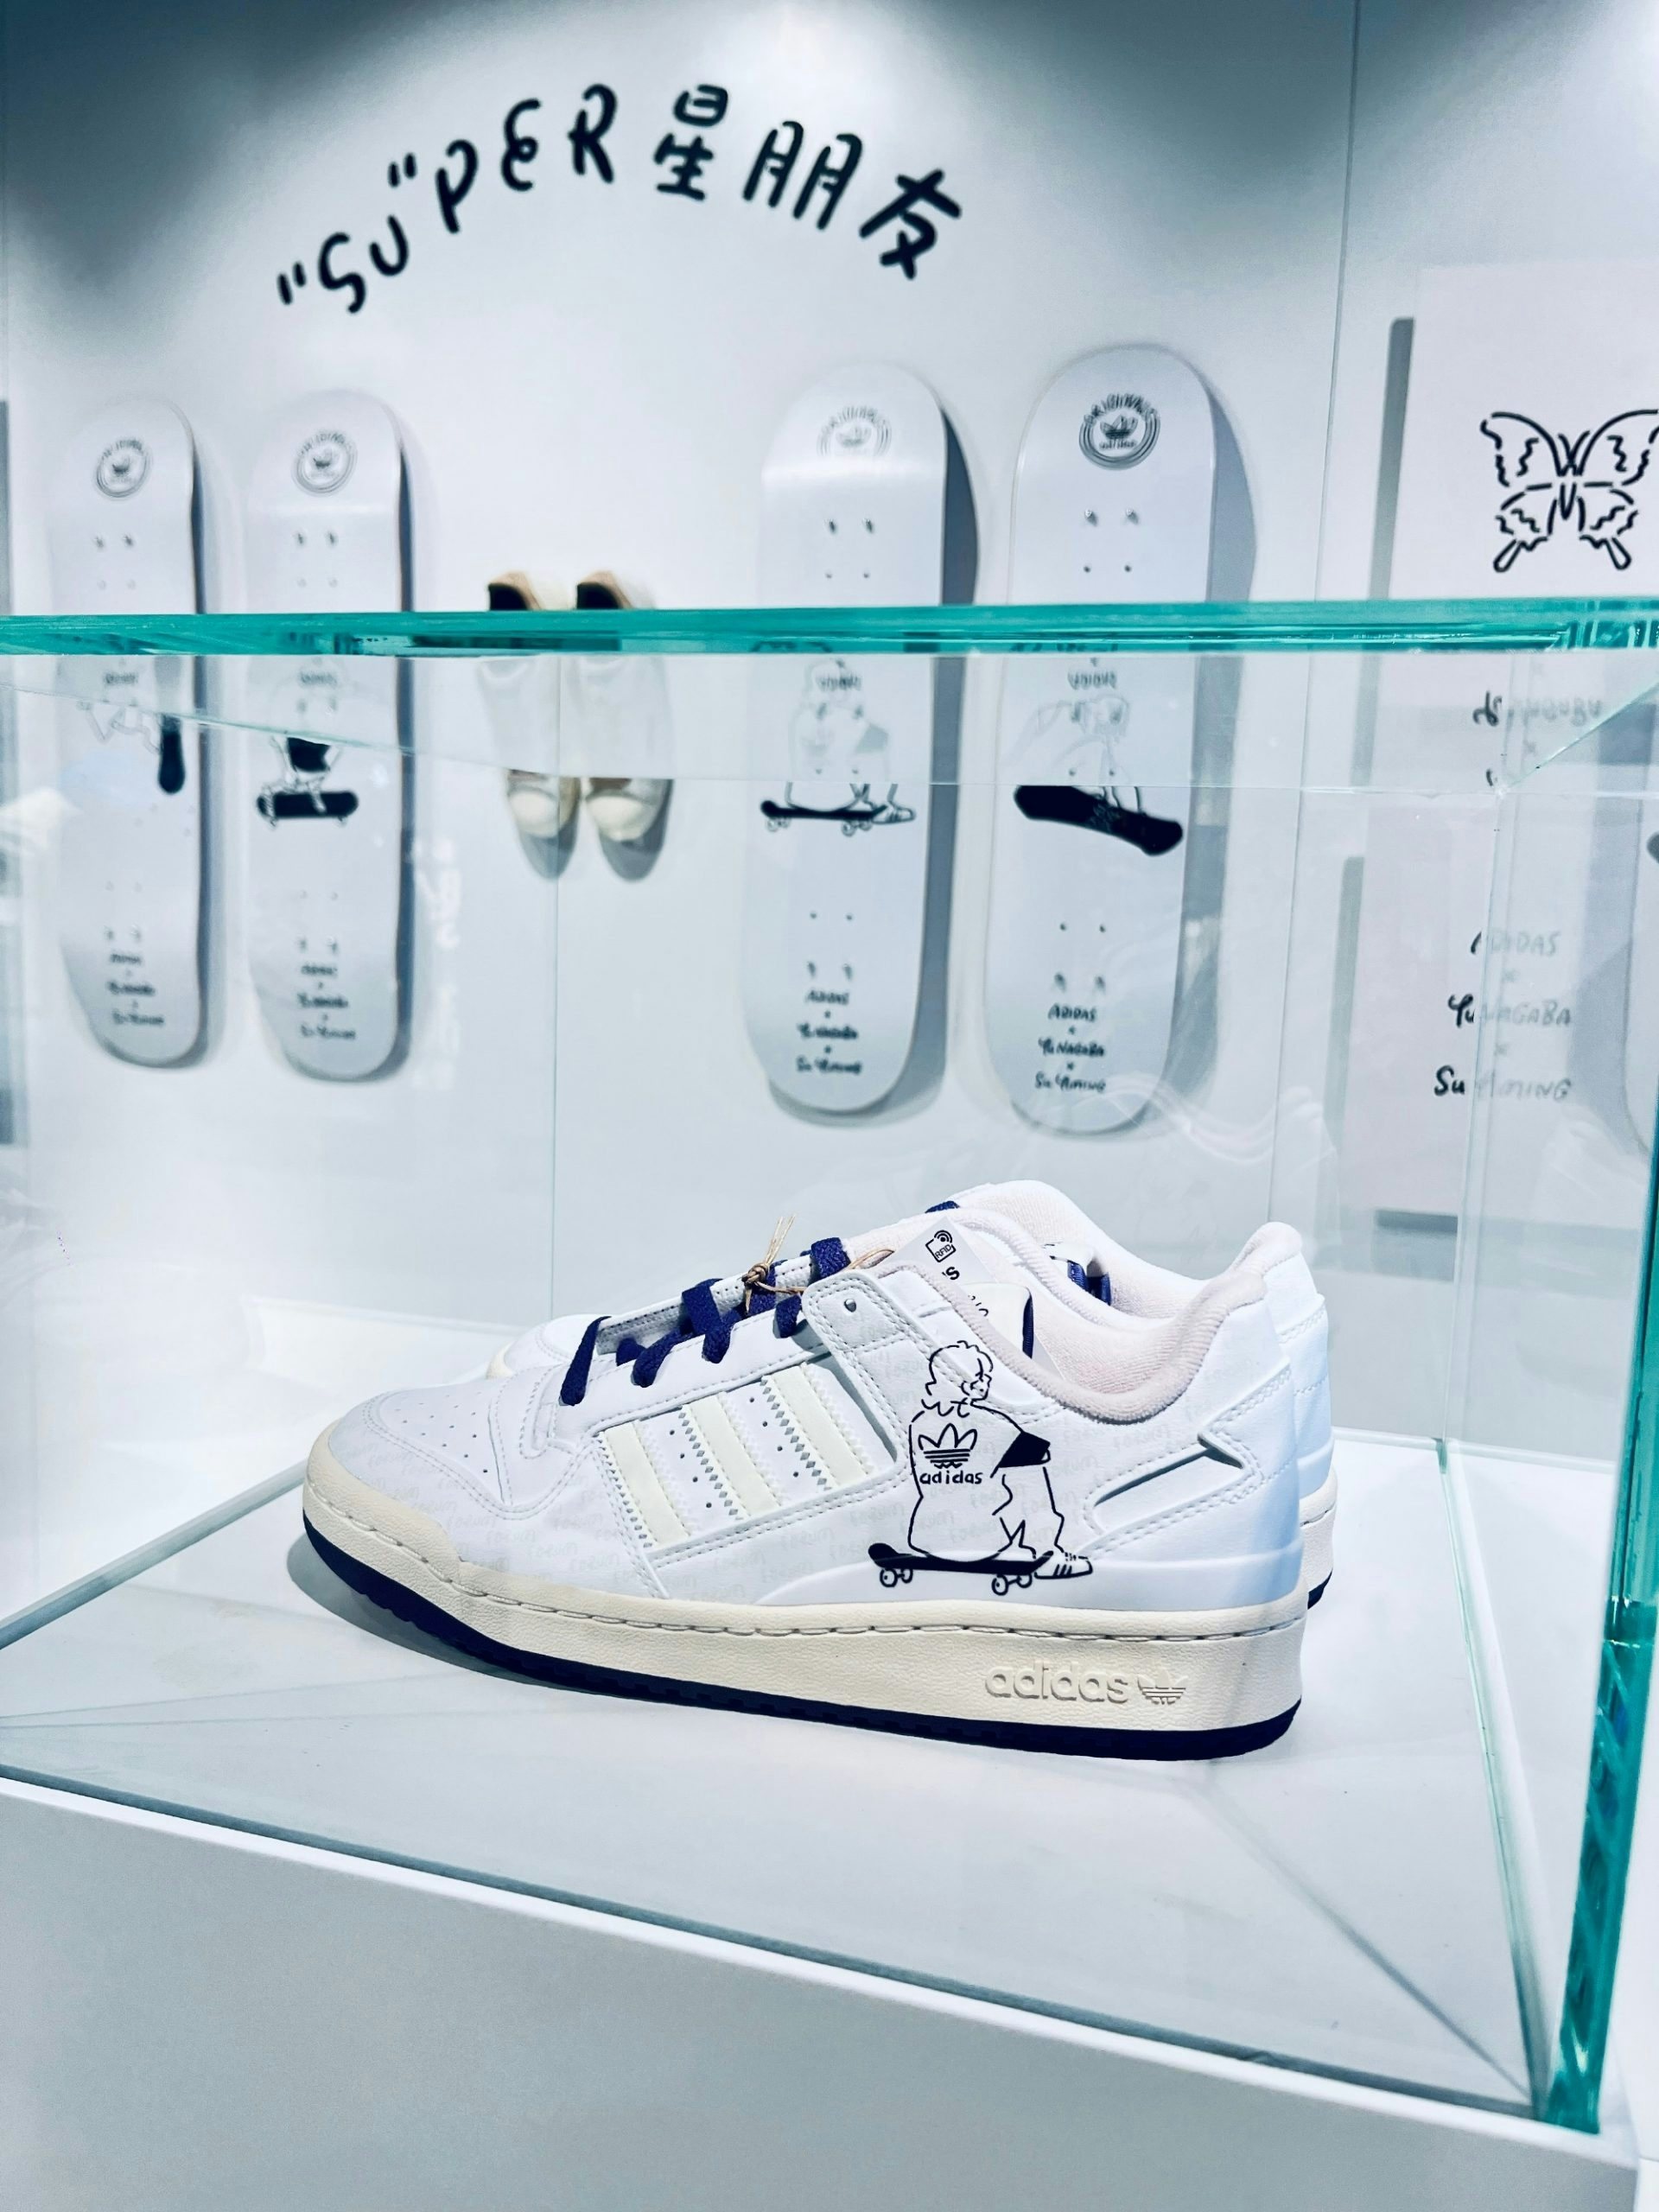 Adidas often uses collaboration as a vehicle to connect with local markets, such as this one with Yu Nagaba and Su Yiming. Photo: Adidas Weibo